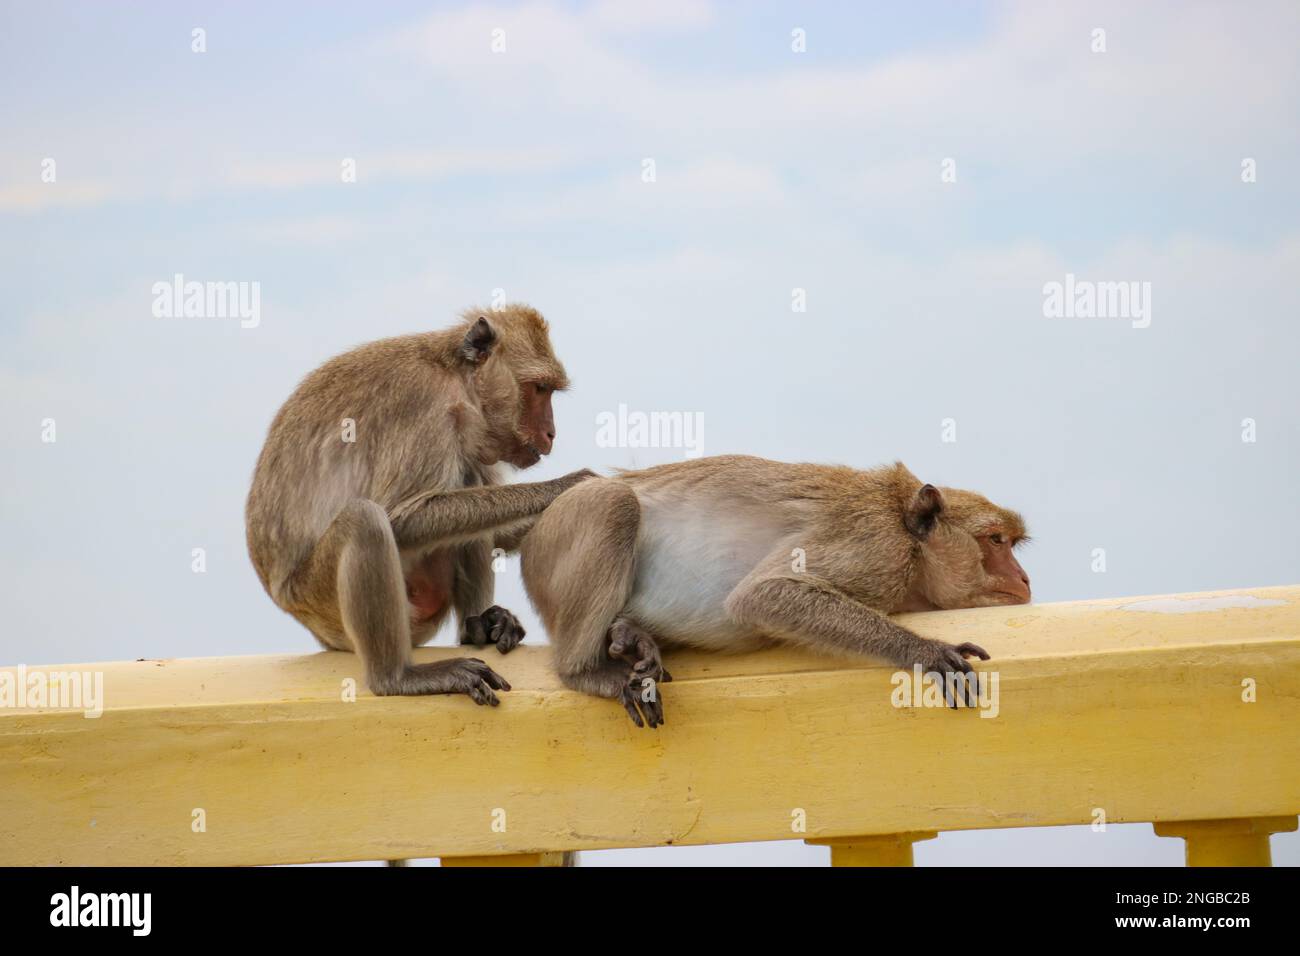 An adult wild female macaque looking for lice from an alpha male. The concept of dominance and care in nature. Stock Photo